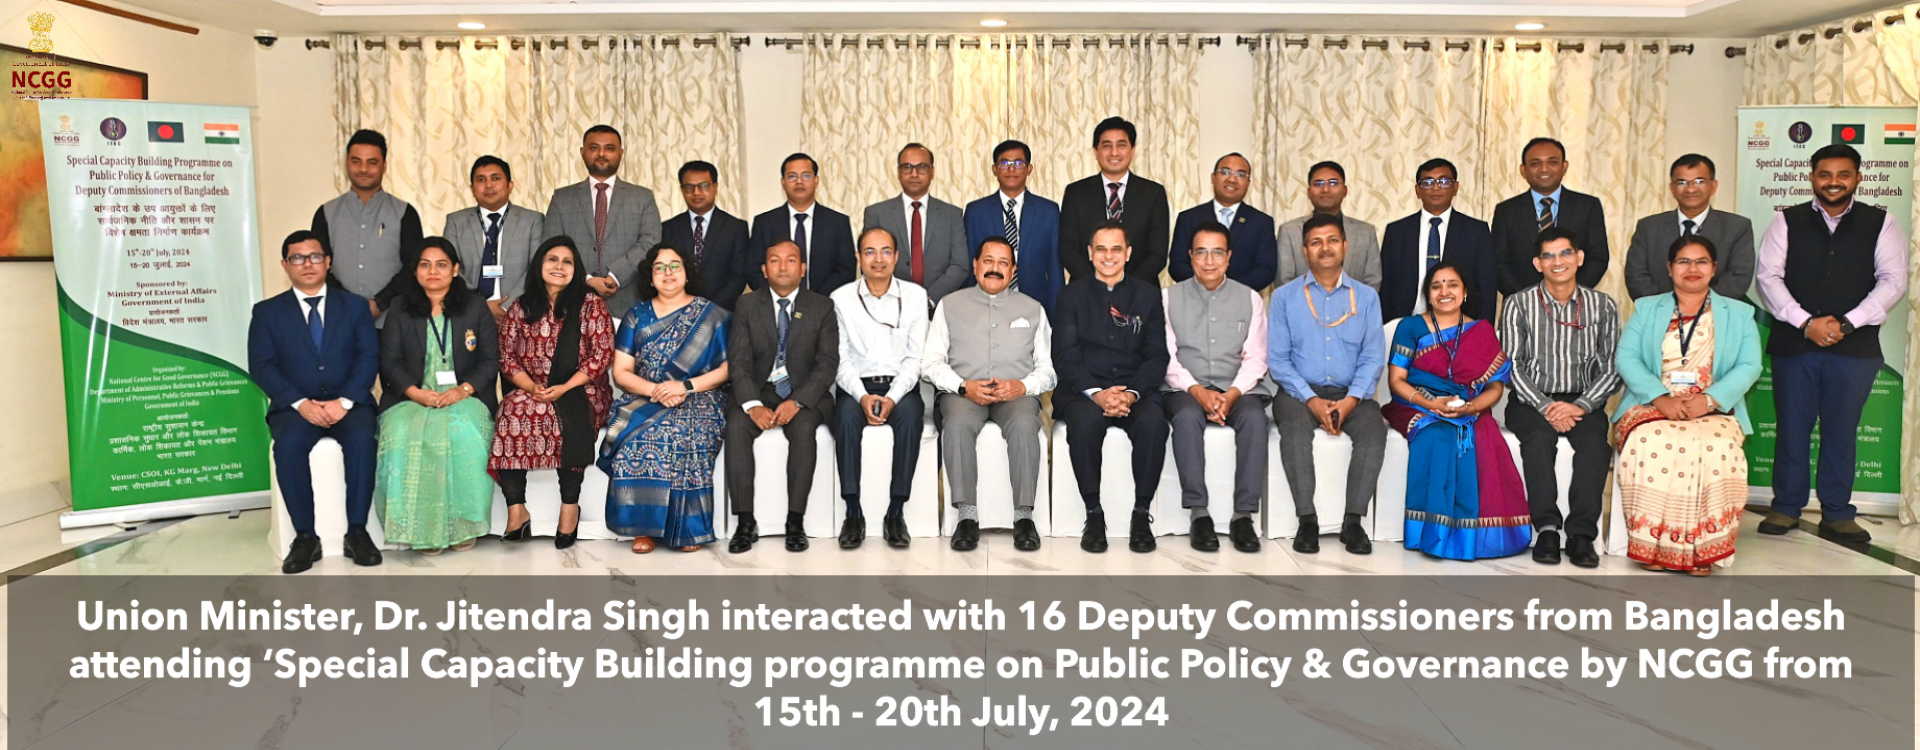 Union Minister, Dr. Jitendra Singh interacted with 16 Deputy Commissioners from Bangladesh attending ‘Special Capacity Building programme on Public Policy &amp; Governance by NCGG